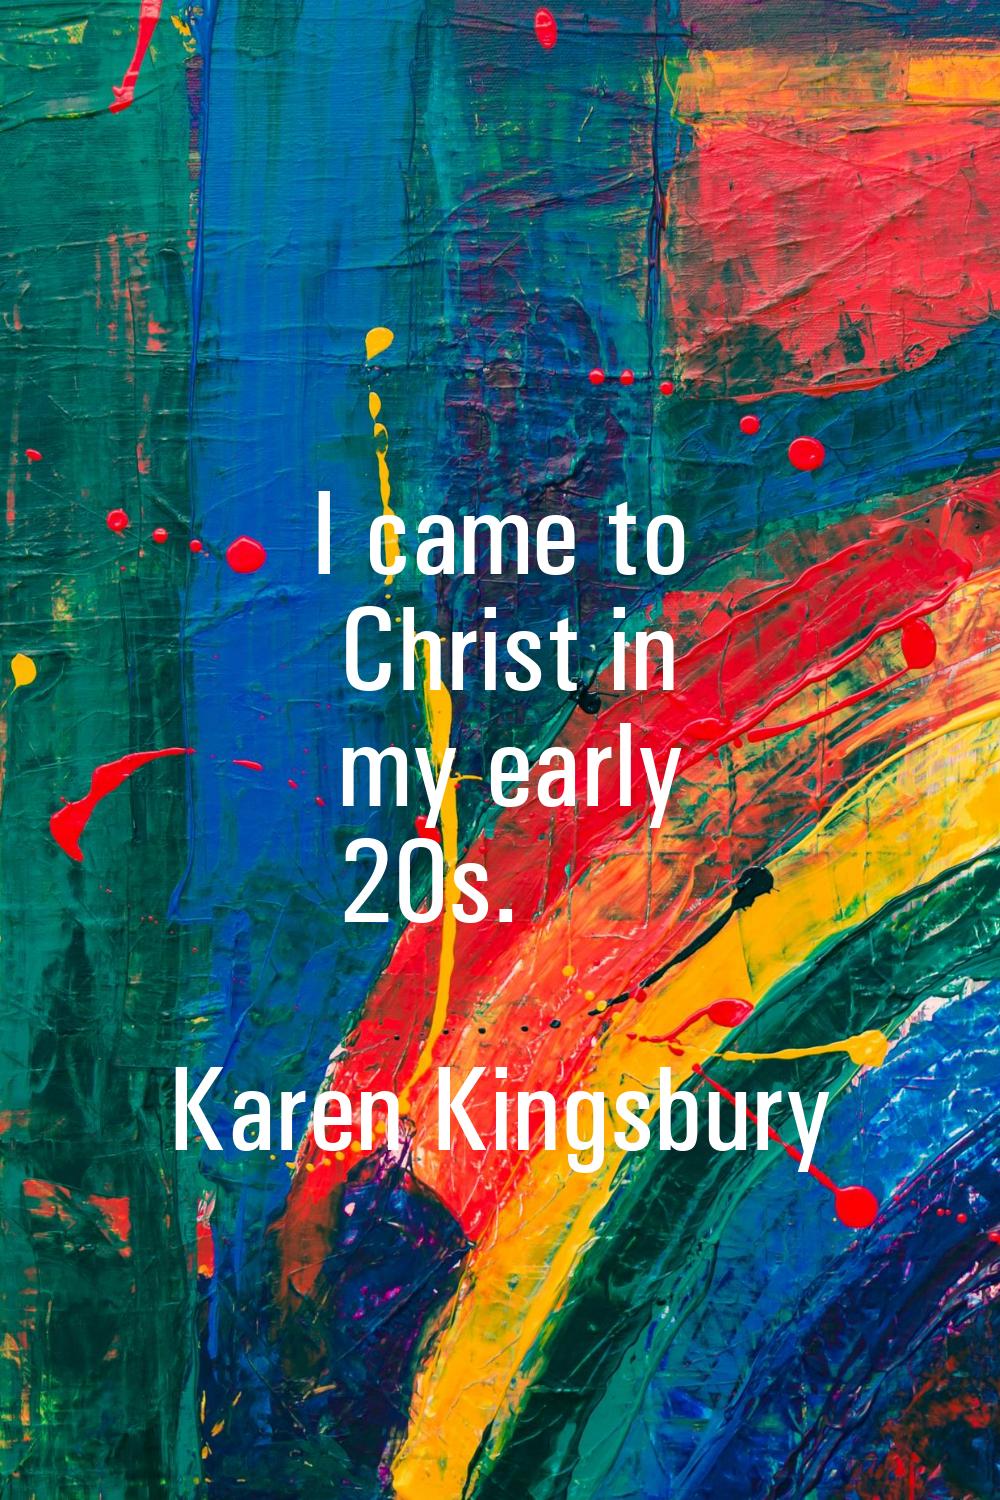 I came to Christ in my early 20s.